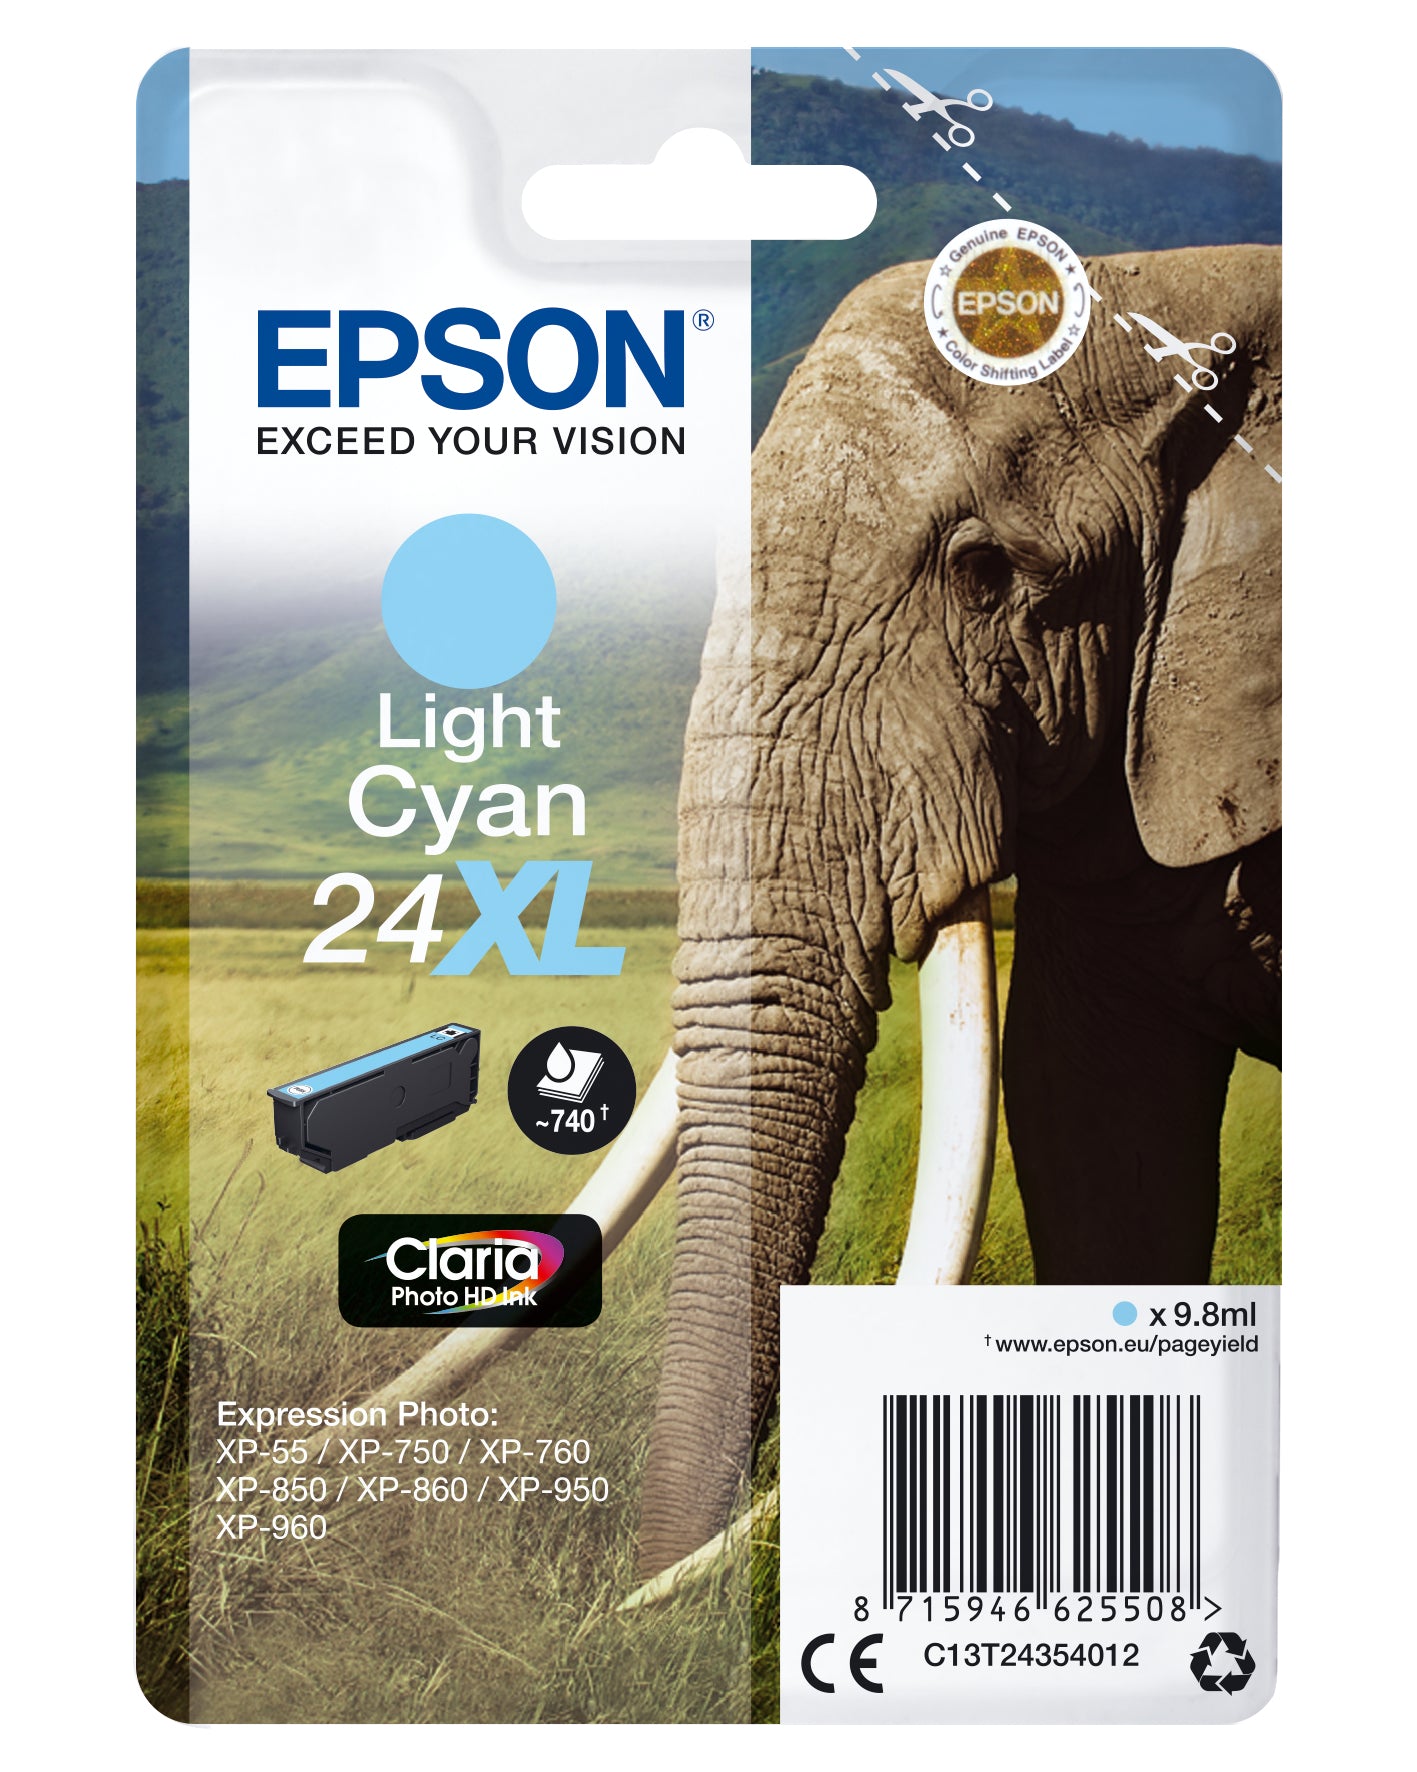 Epson C13T24354012/24XL Ink cartridge light cyan high-capacity, 500 pages 9,8ml for Epson XP 750